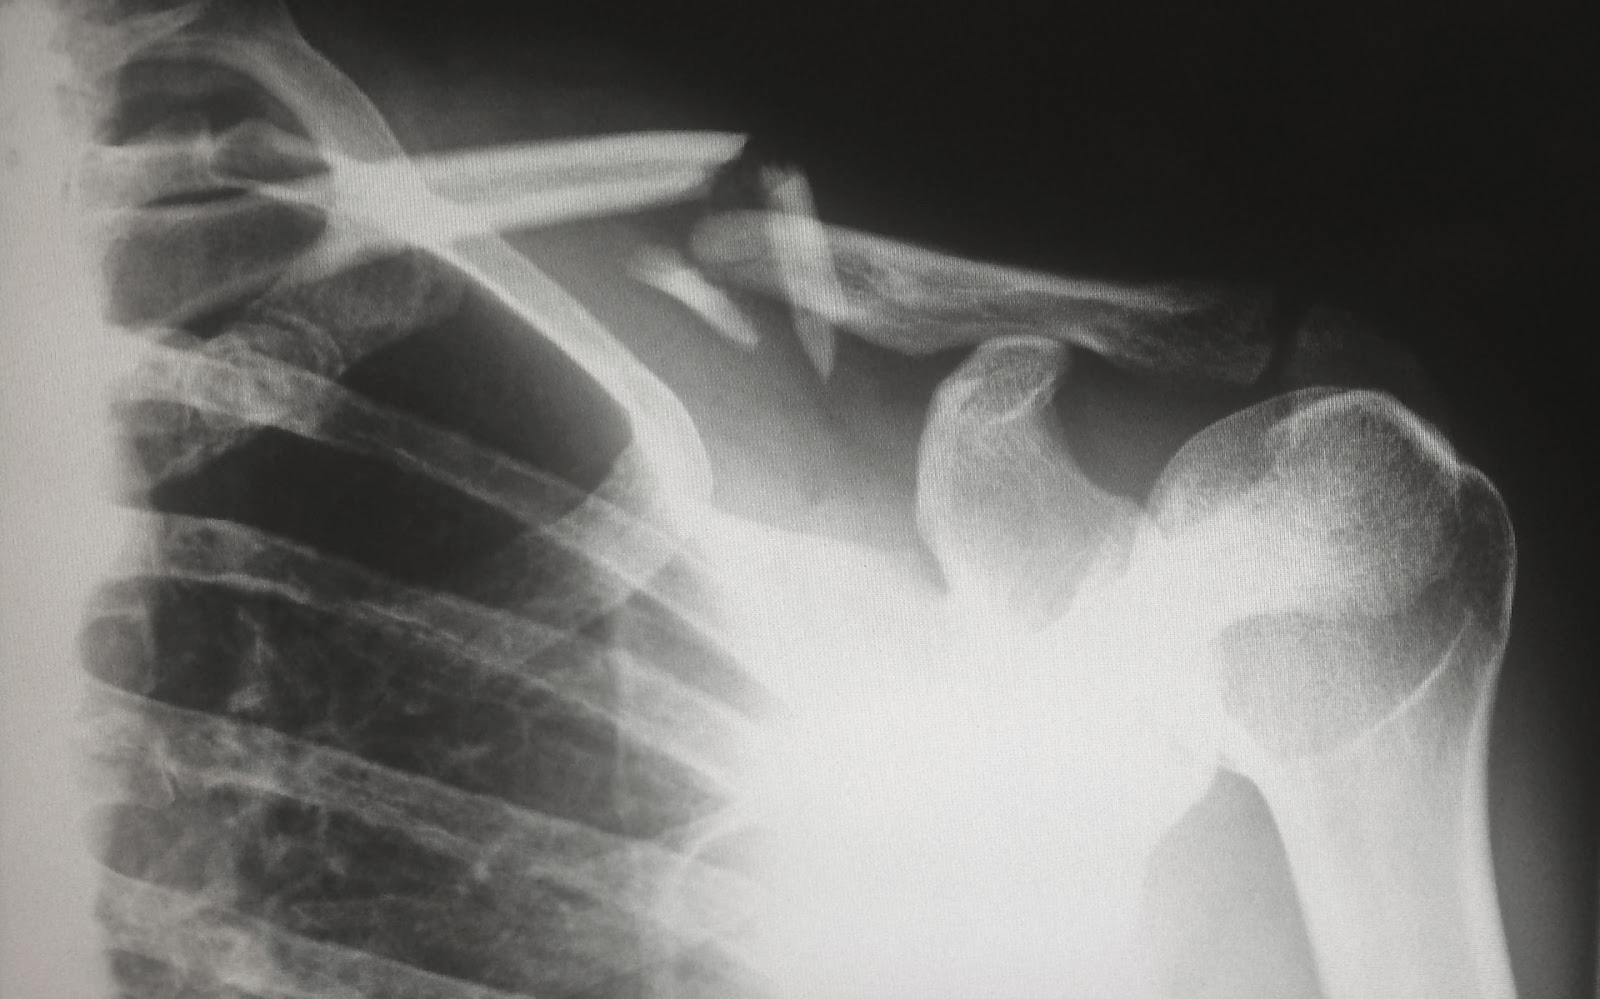 An x-ray of a broken collarbone